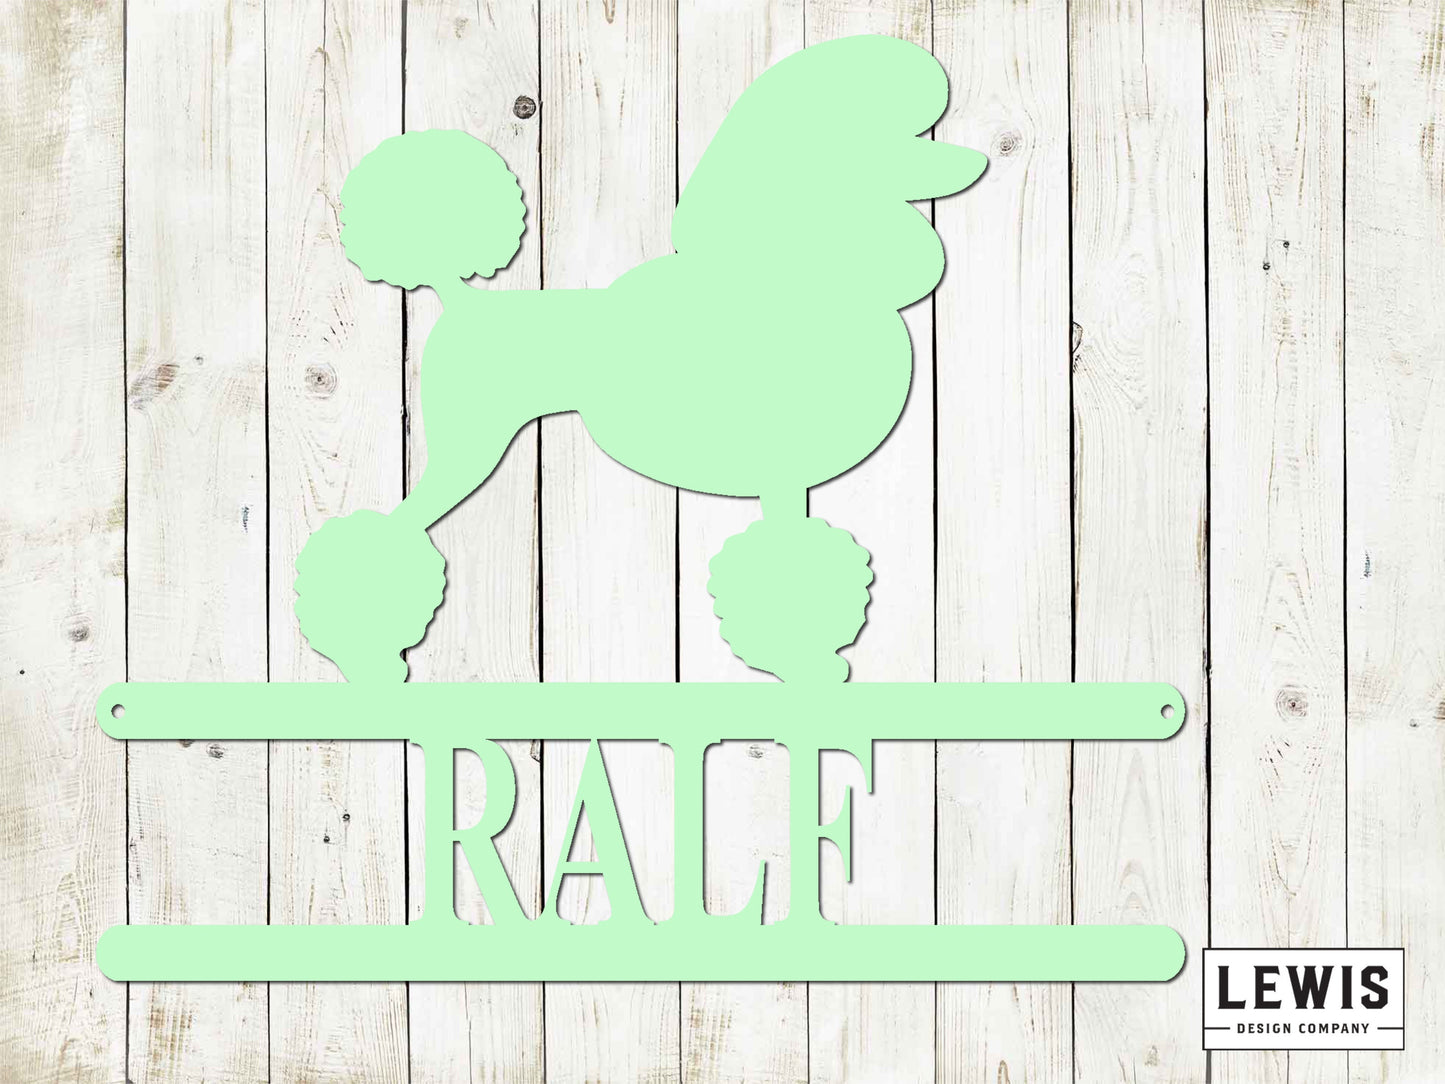 Poodle Wall Sign with Custom Name, Metal Sign, Poodle Sign, Custom Metal Sign, Poodle, Dog Lovers, Dog Sign, Custom Name Dog Sign